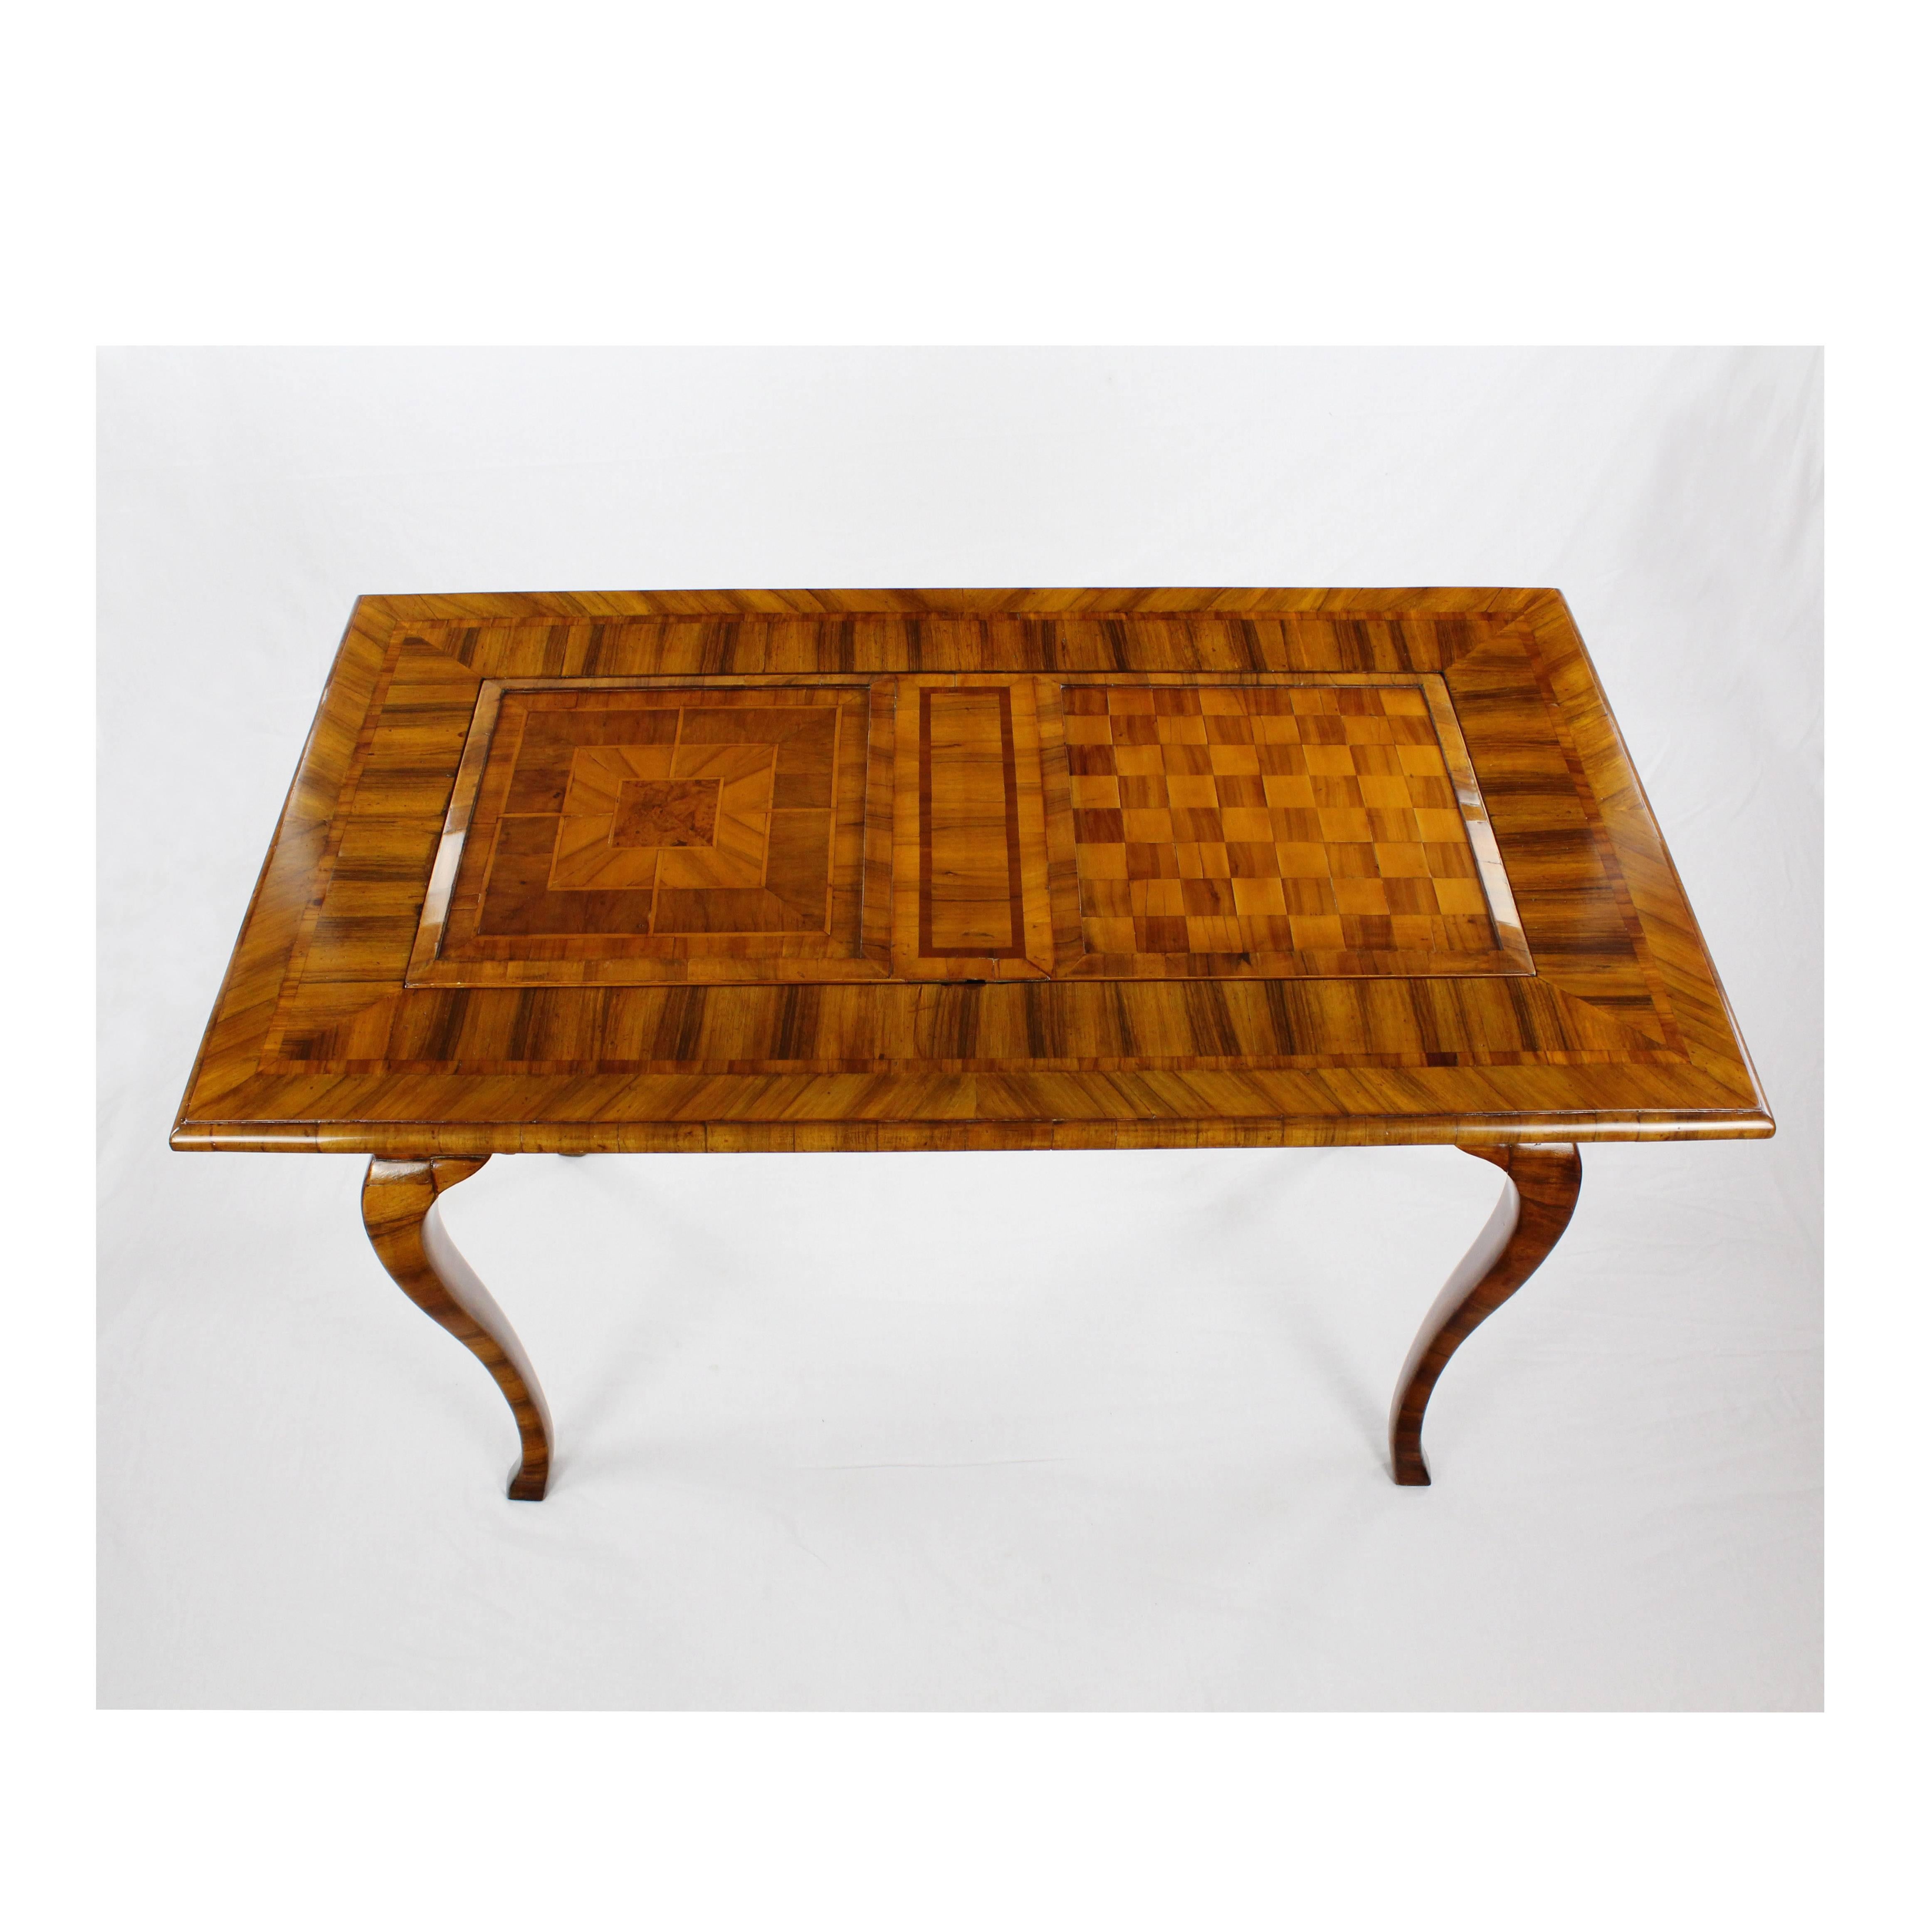 18th Century Game Table or Baroque, circa 1760 for Chess Checkers, Merels, Backgammon For Sale